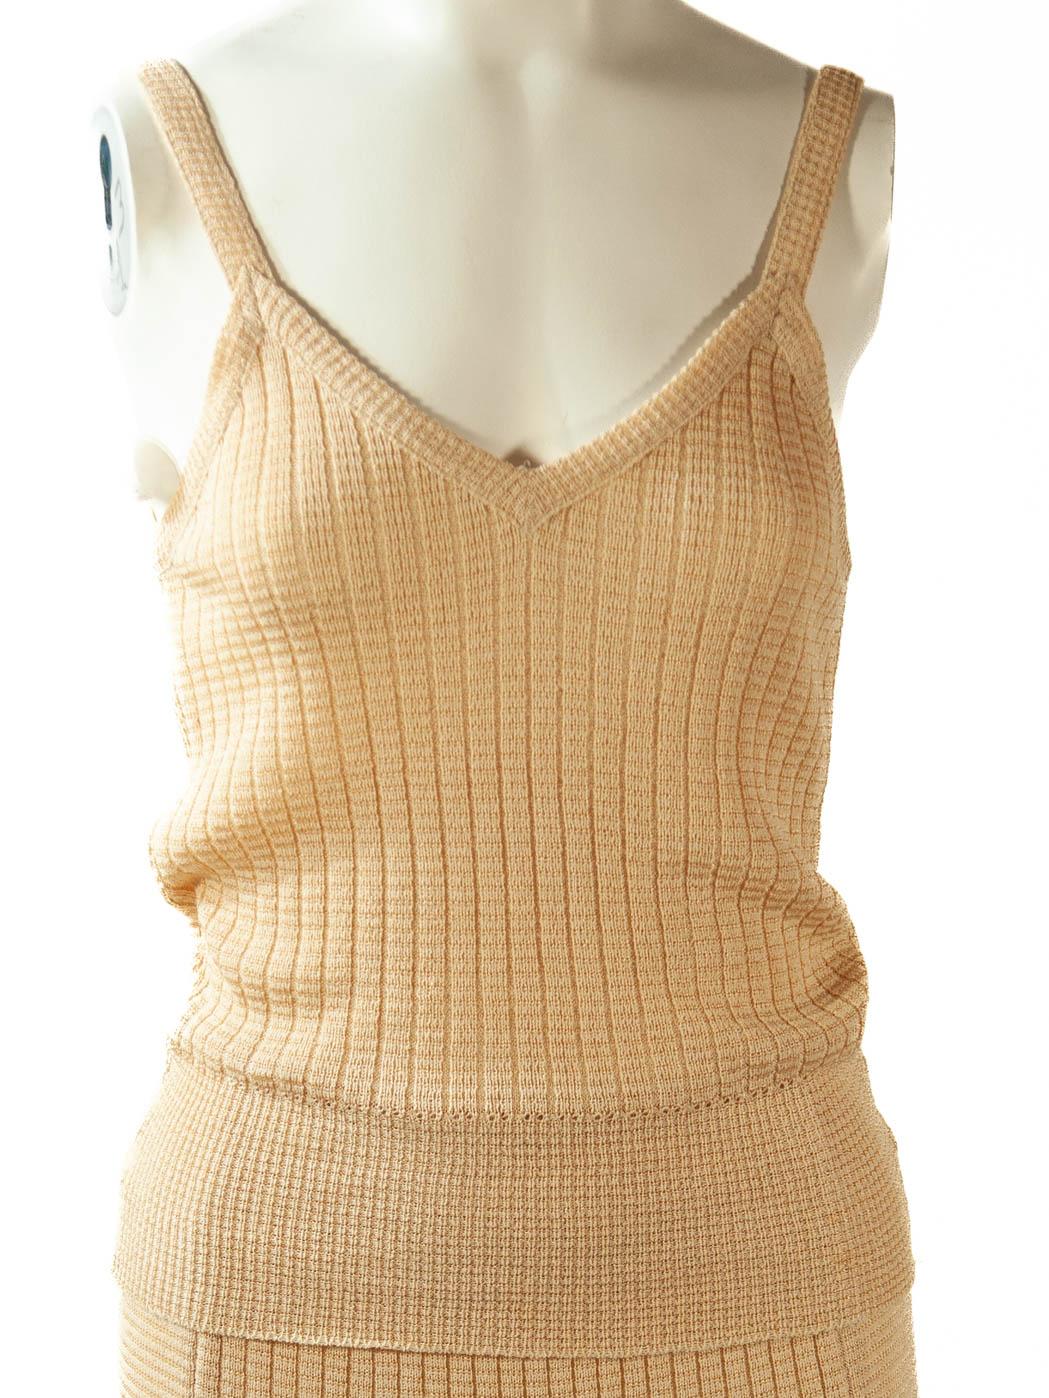 Missoni, Museum Documented Ensemble, Camisole, Skirt and Cardigan, 1973 For Sale 5